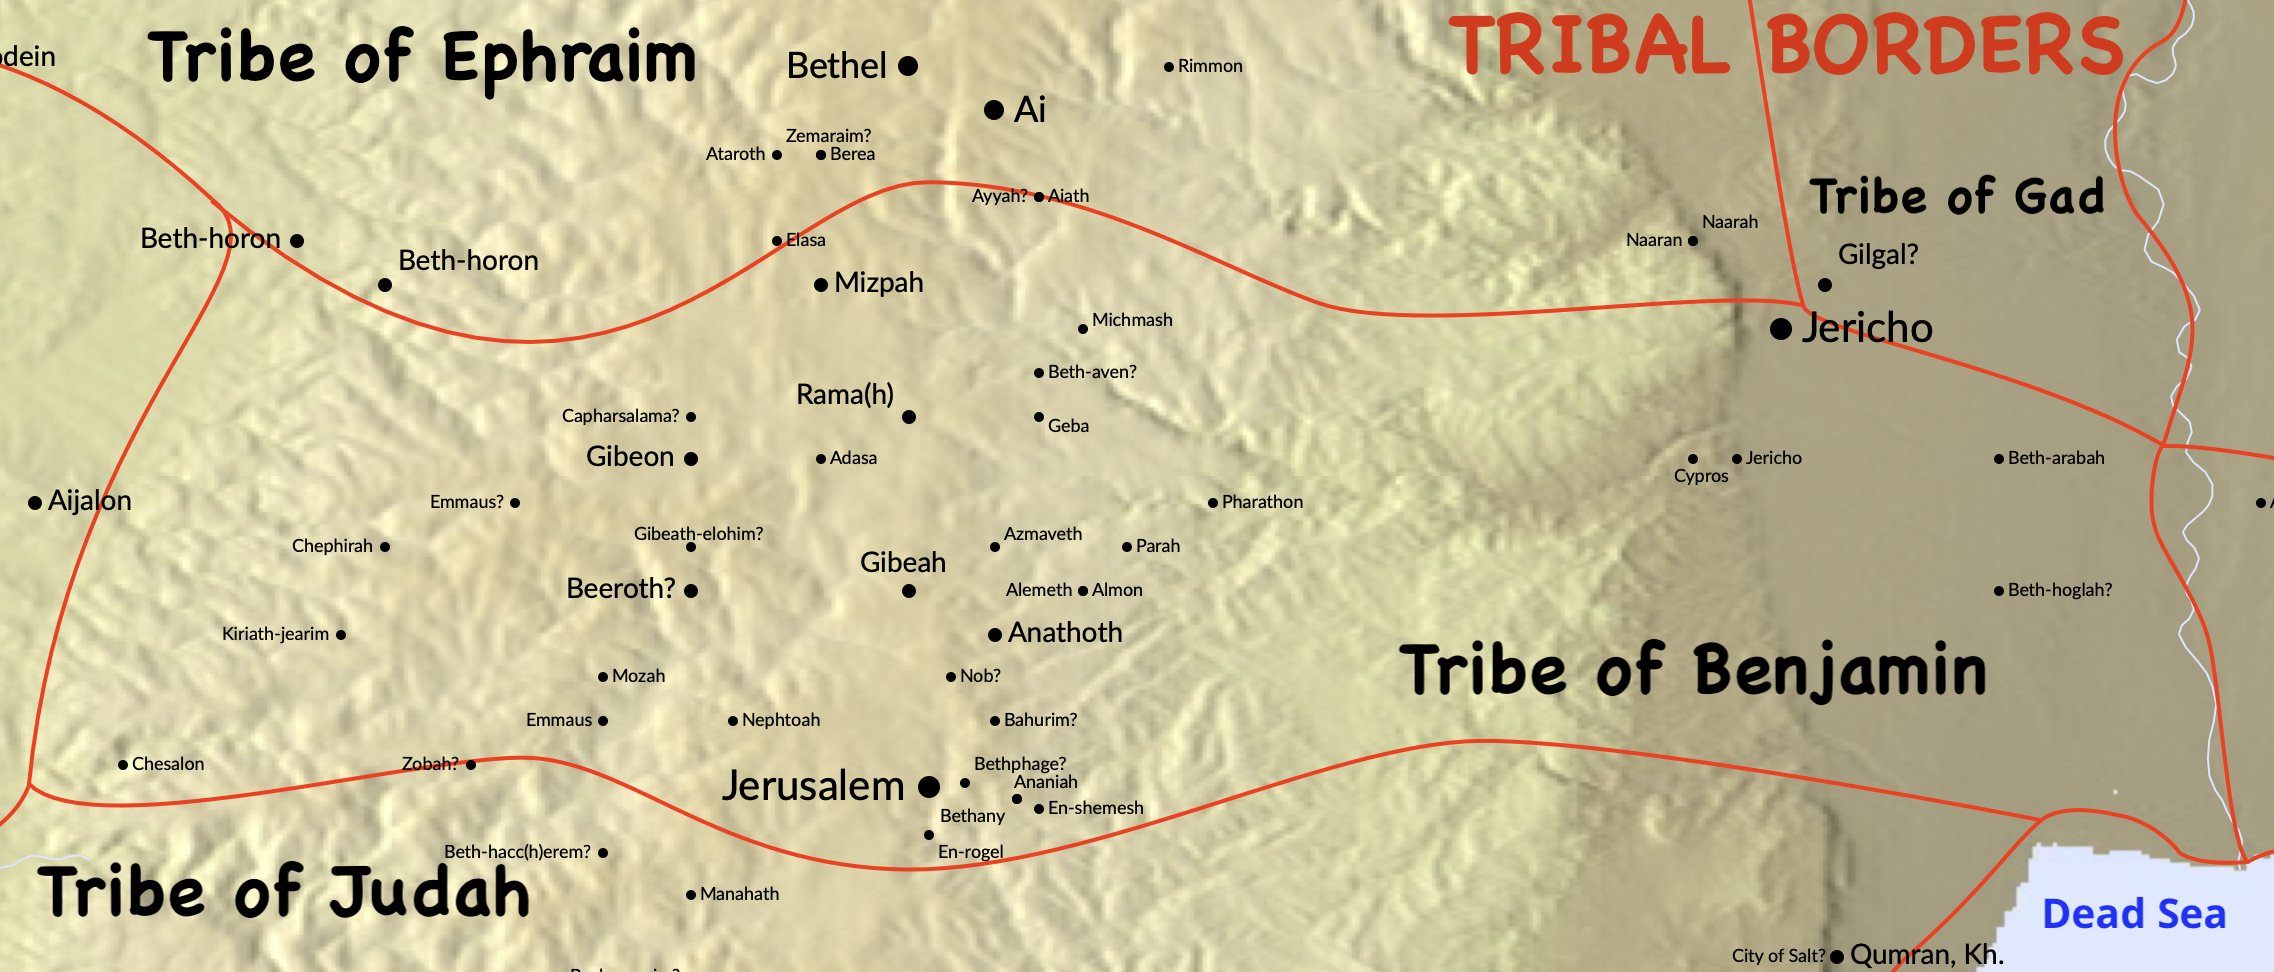 A map of the tribe of Benjamin's tribal borders.